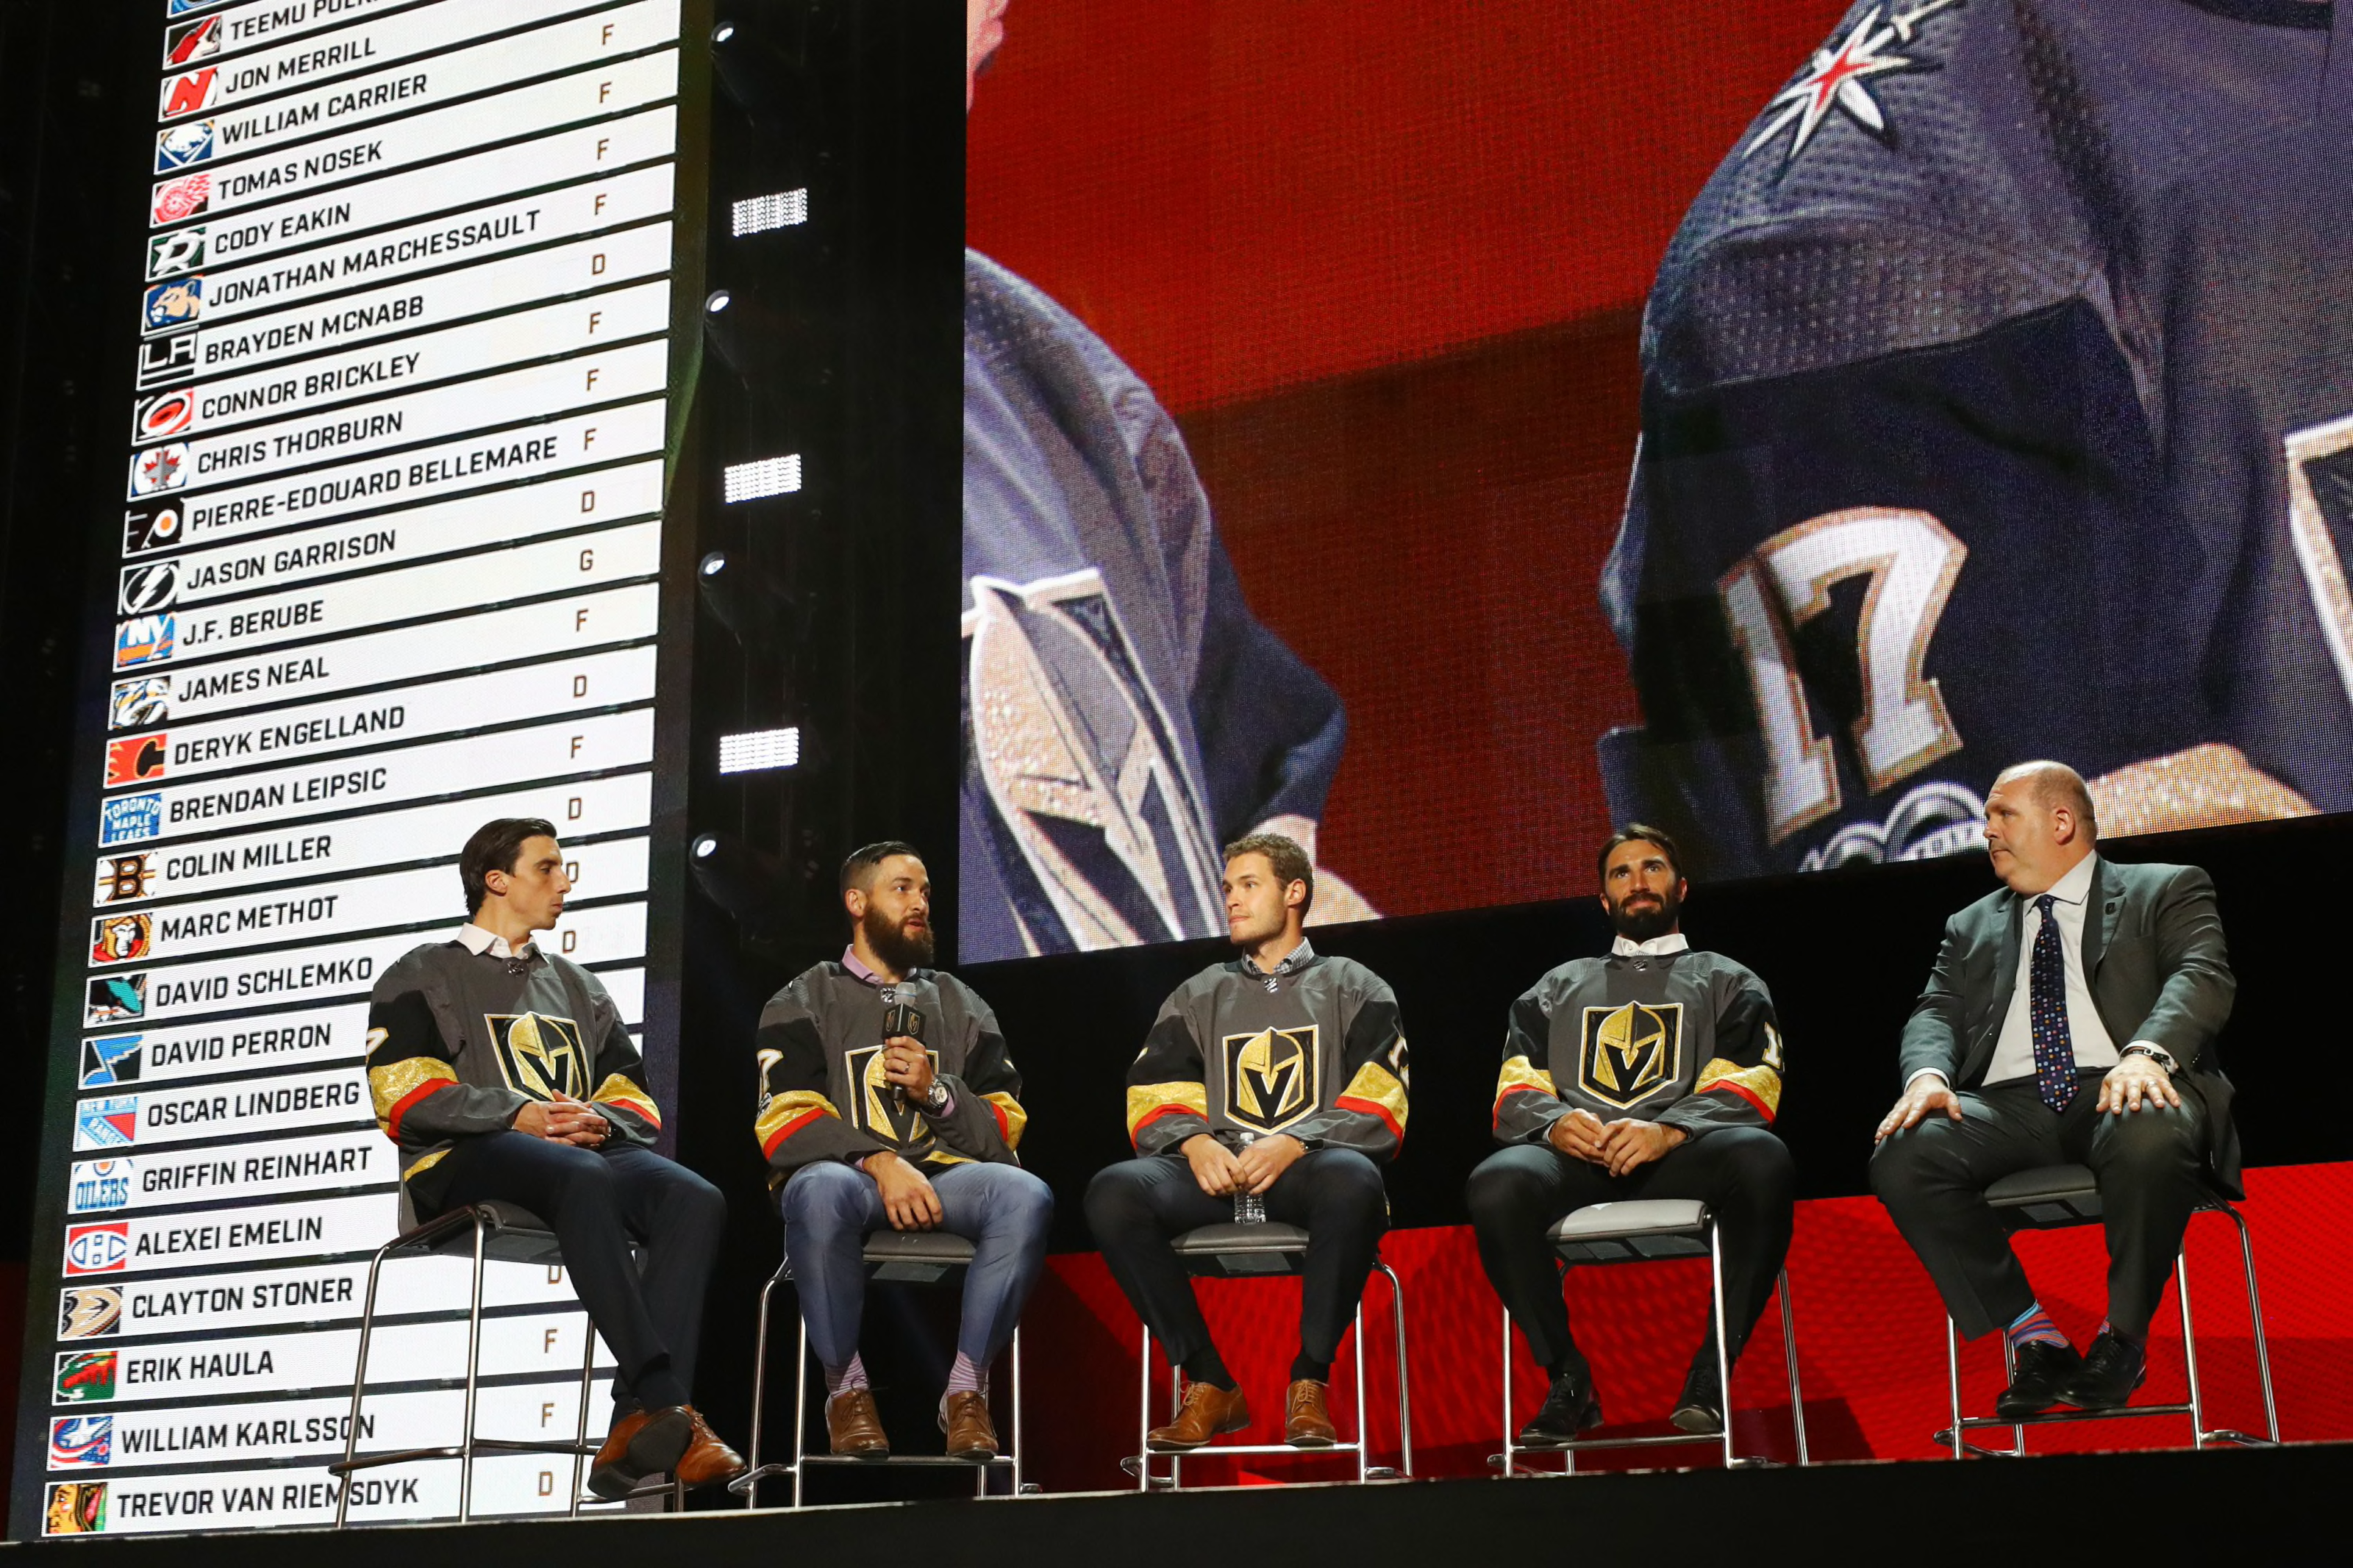 Dispelling some myths about the Vegas Golden Knights